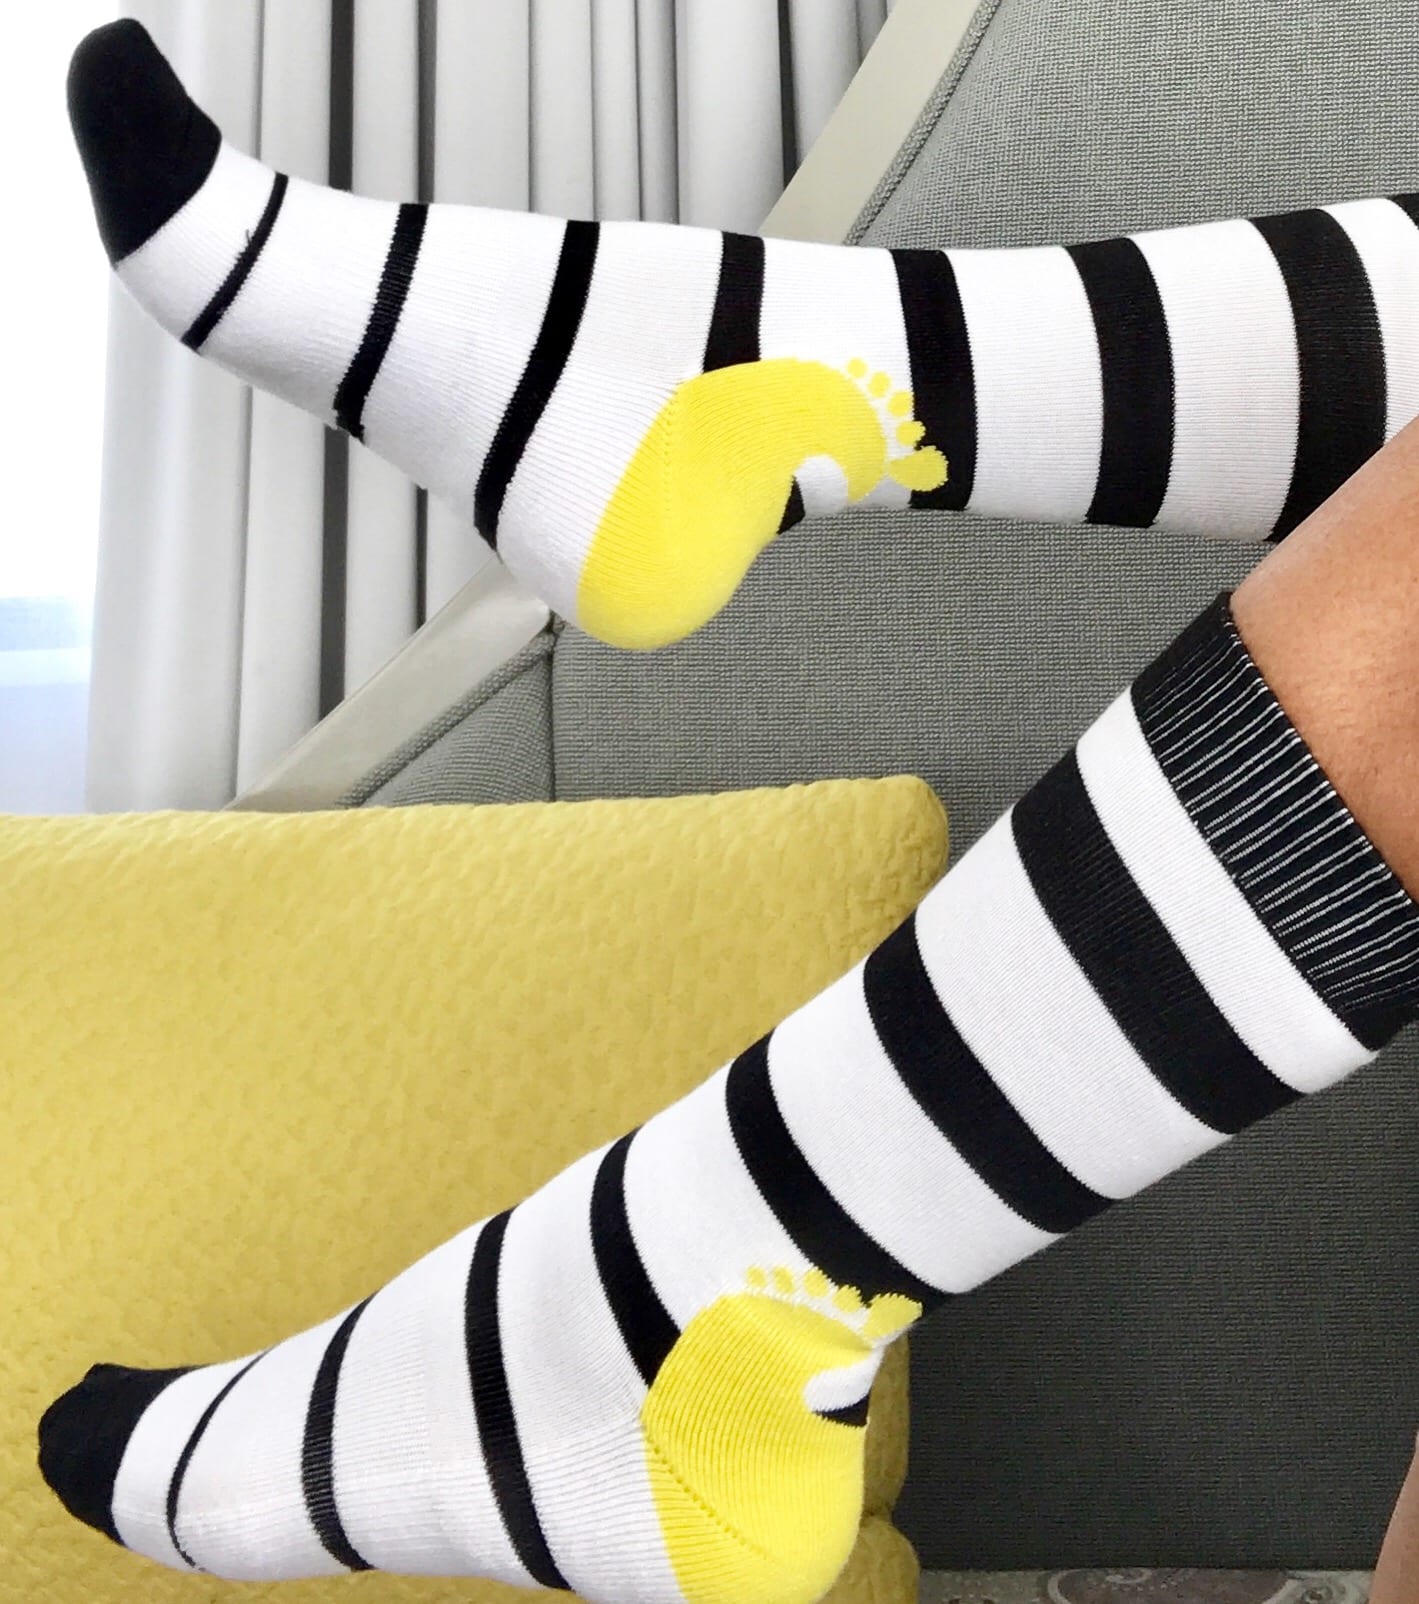 Women's leg wearing a pair of black and white striped magnetic SoleMate Sox that never go missing.